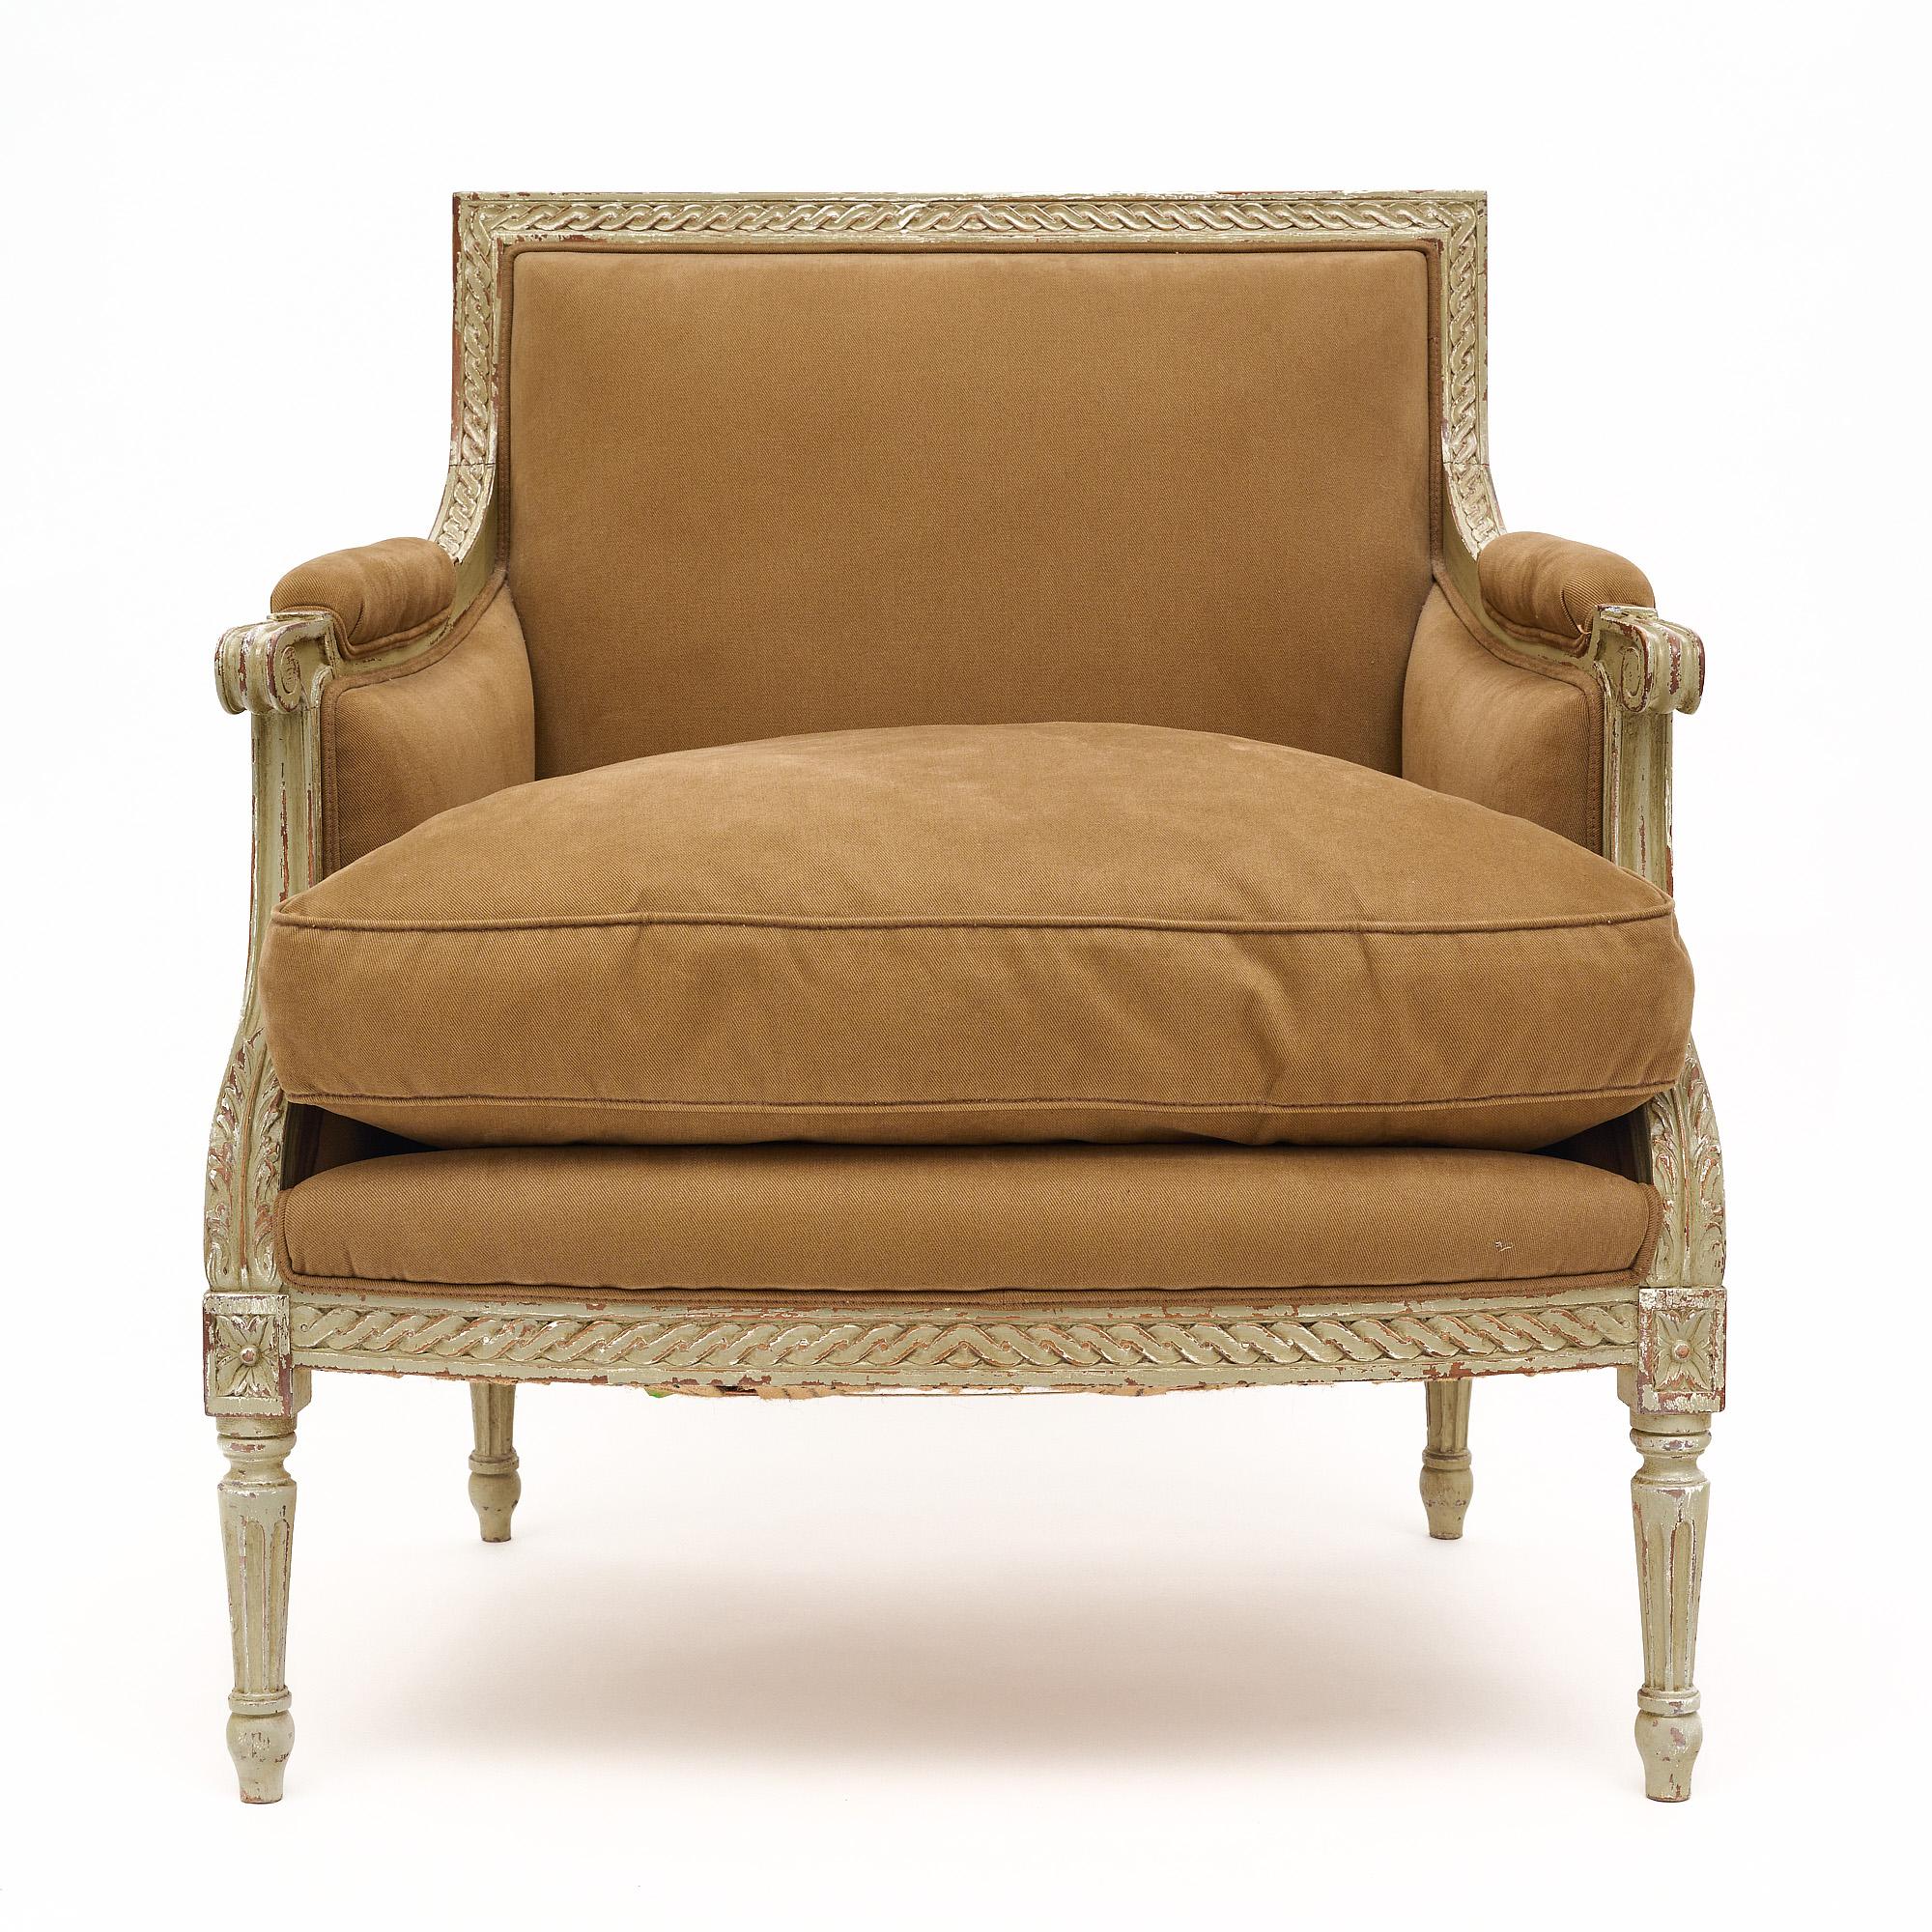 Single bergère armchair from France in the Louis XVI style. This piece has a hand-carved beech wood frame with original ‘trianon’ gray paint and patina. It is upholstered in a tan velvet in good condition. The classic proportions and detail make